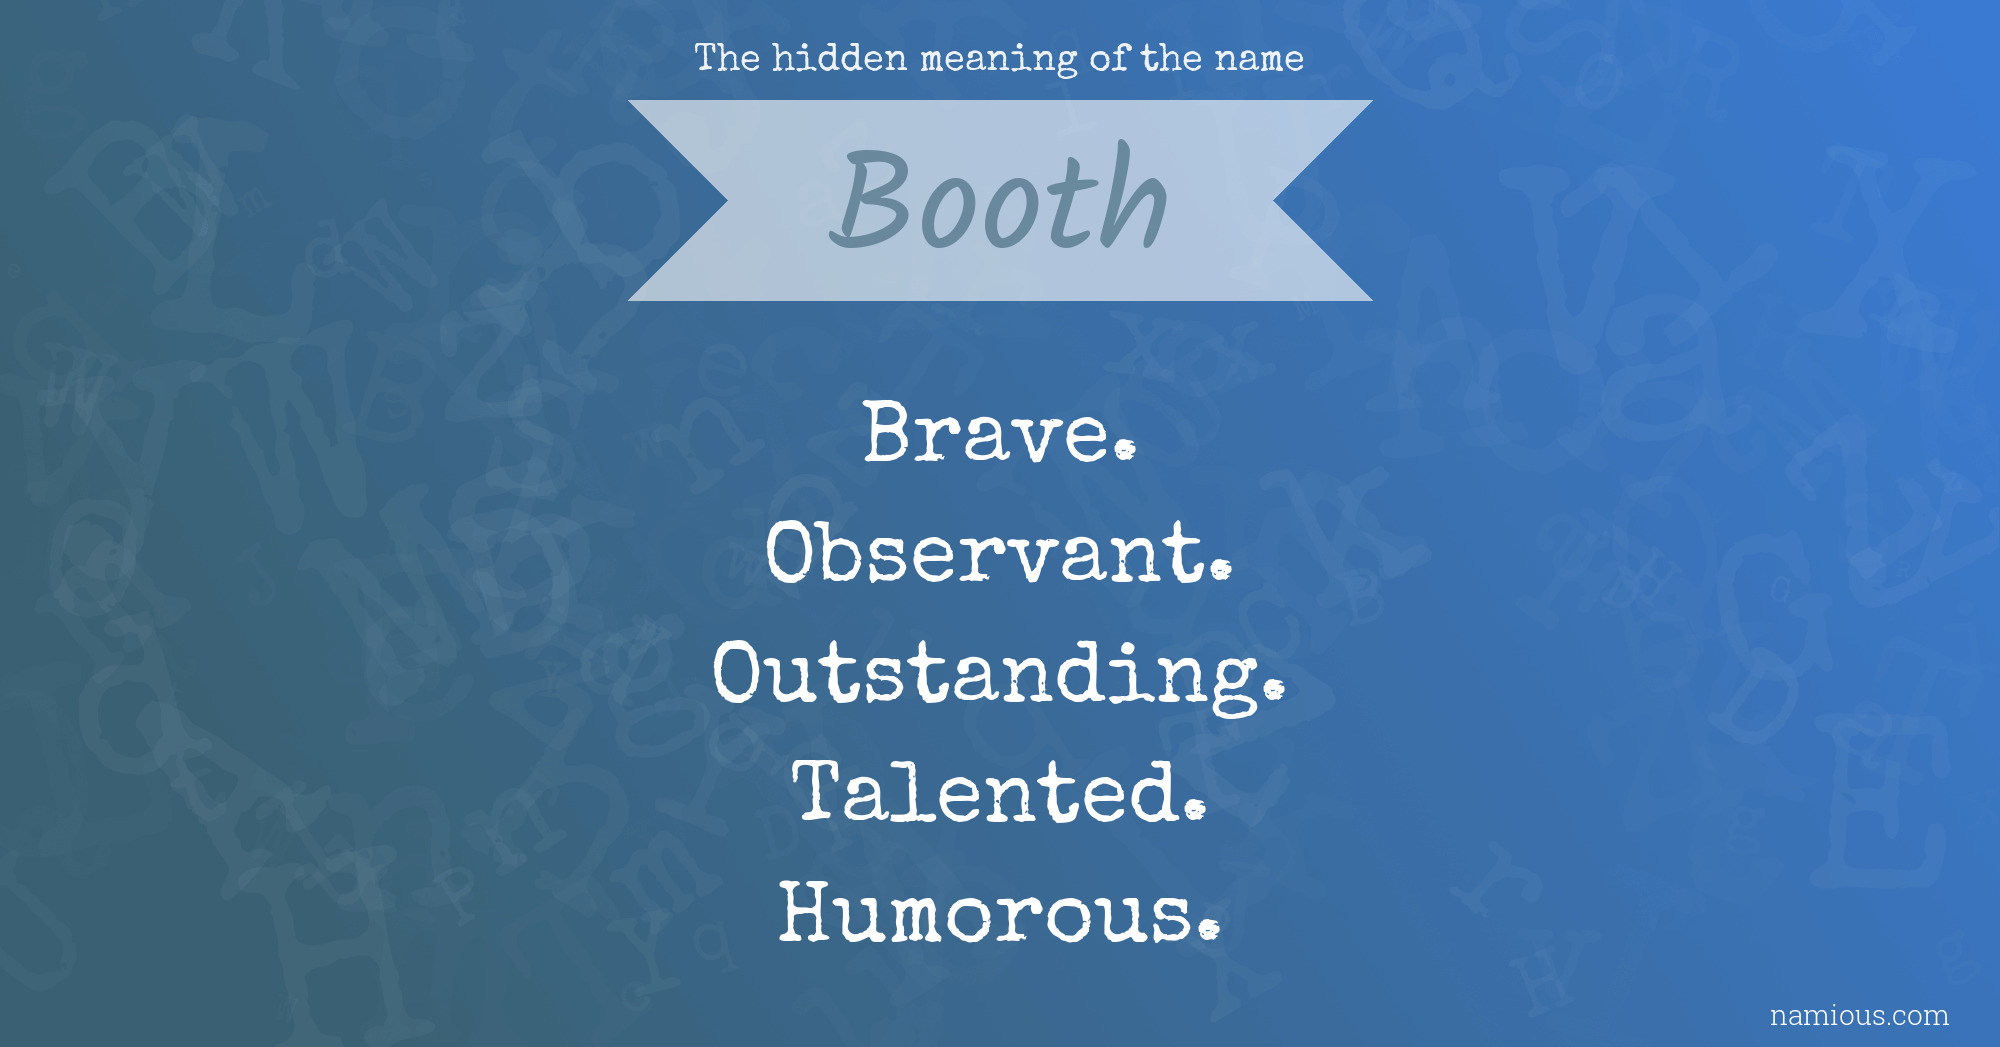 Booth  meaning of Booth 